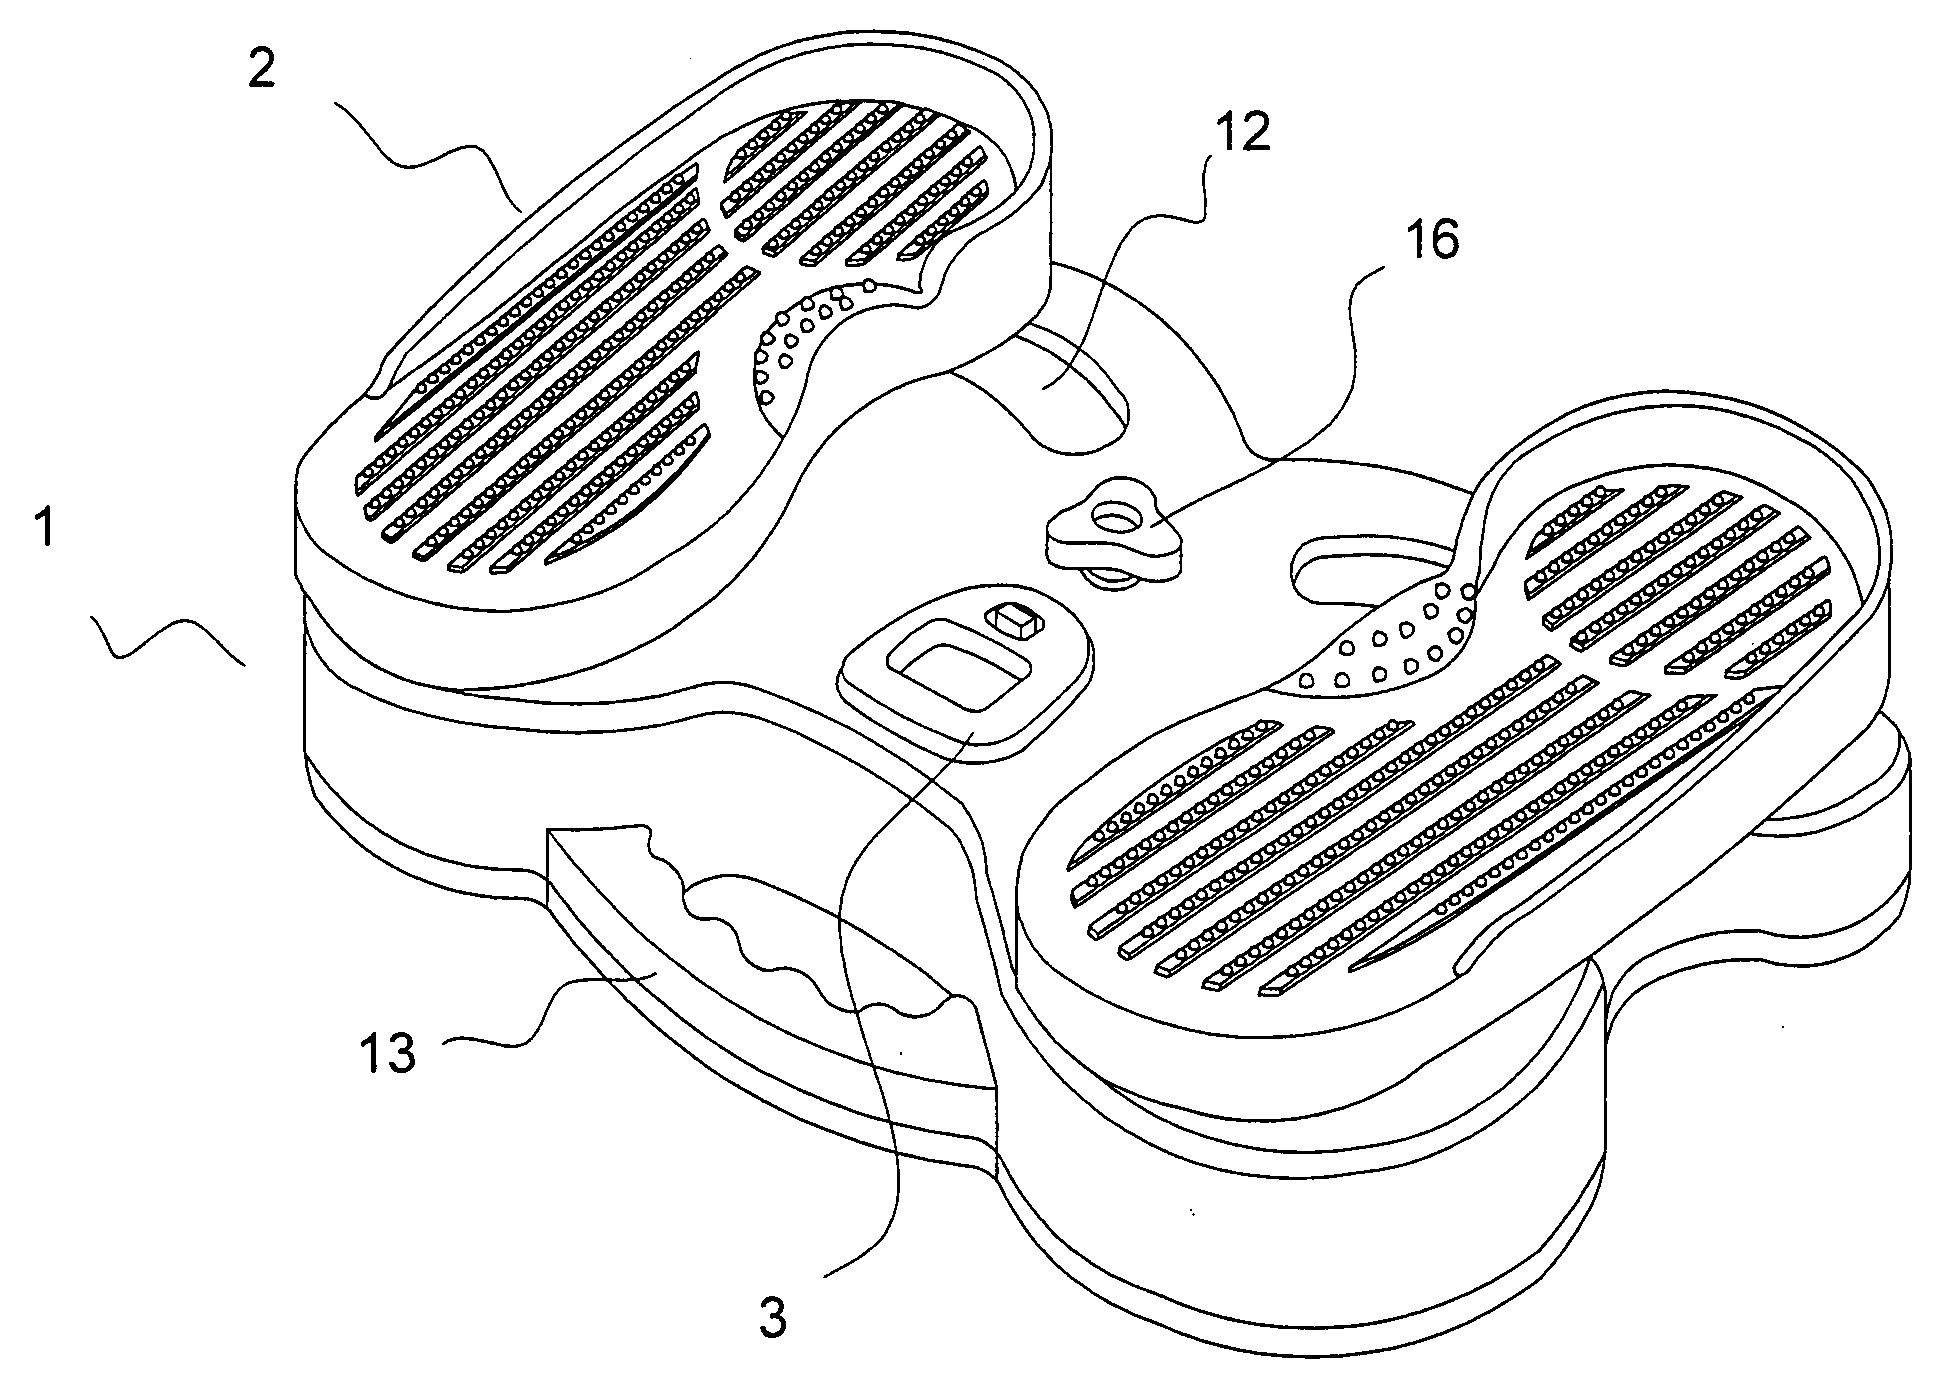 Buttock shaping and training apparatus